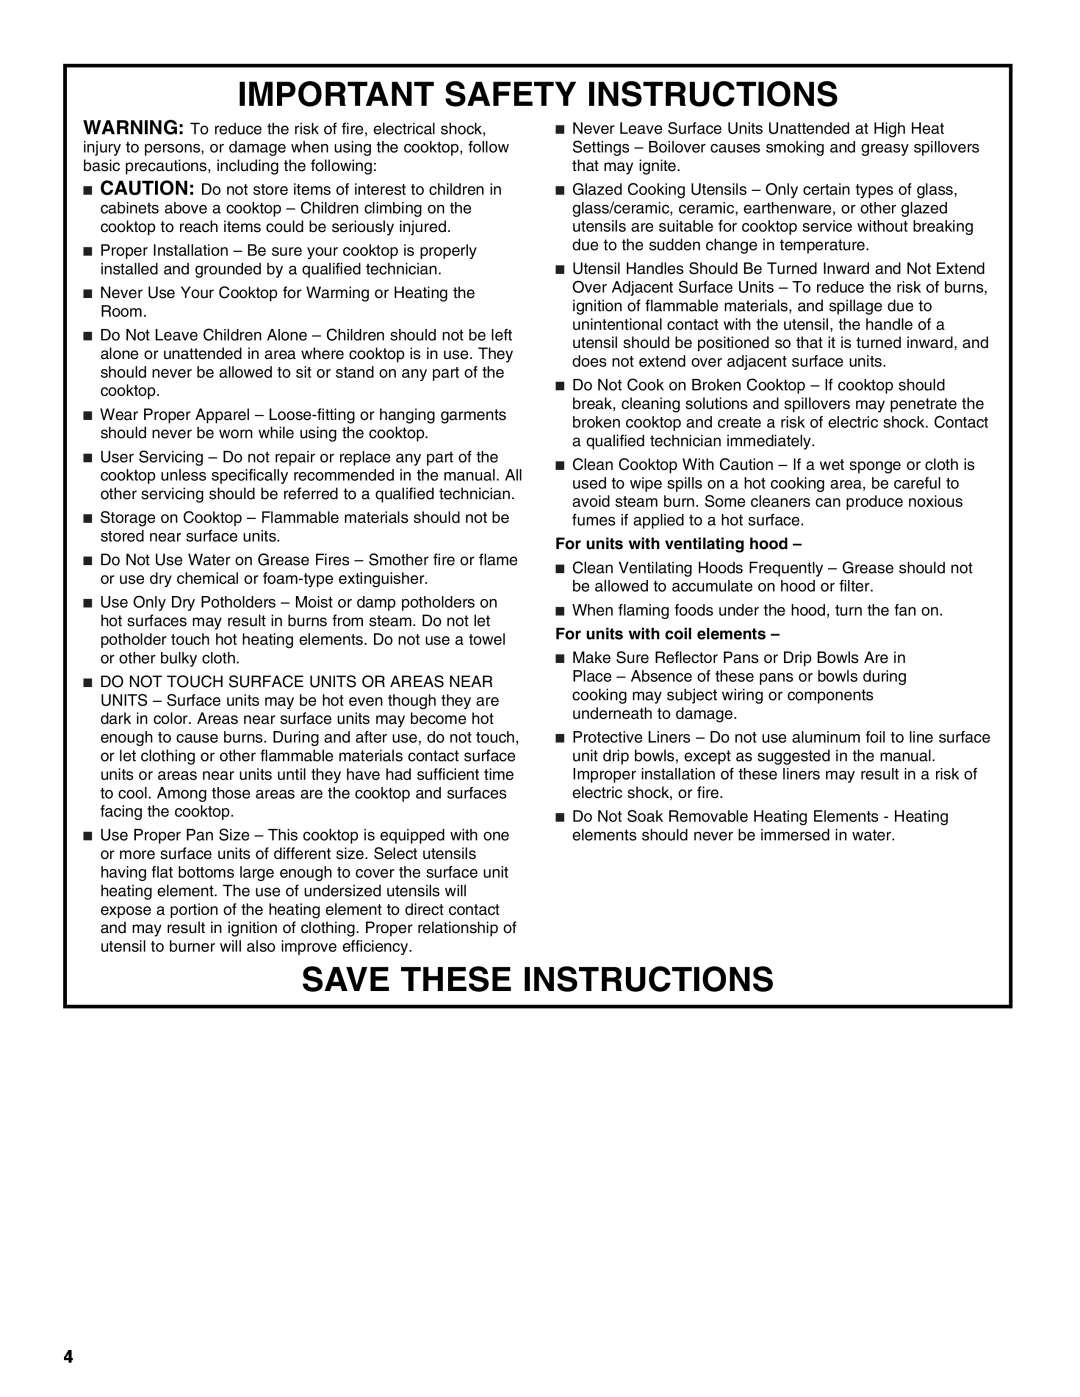 Jenn-Air W10197057B manual Important Safety Instructions, Save These Instructions, For units with ventilating hood 